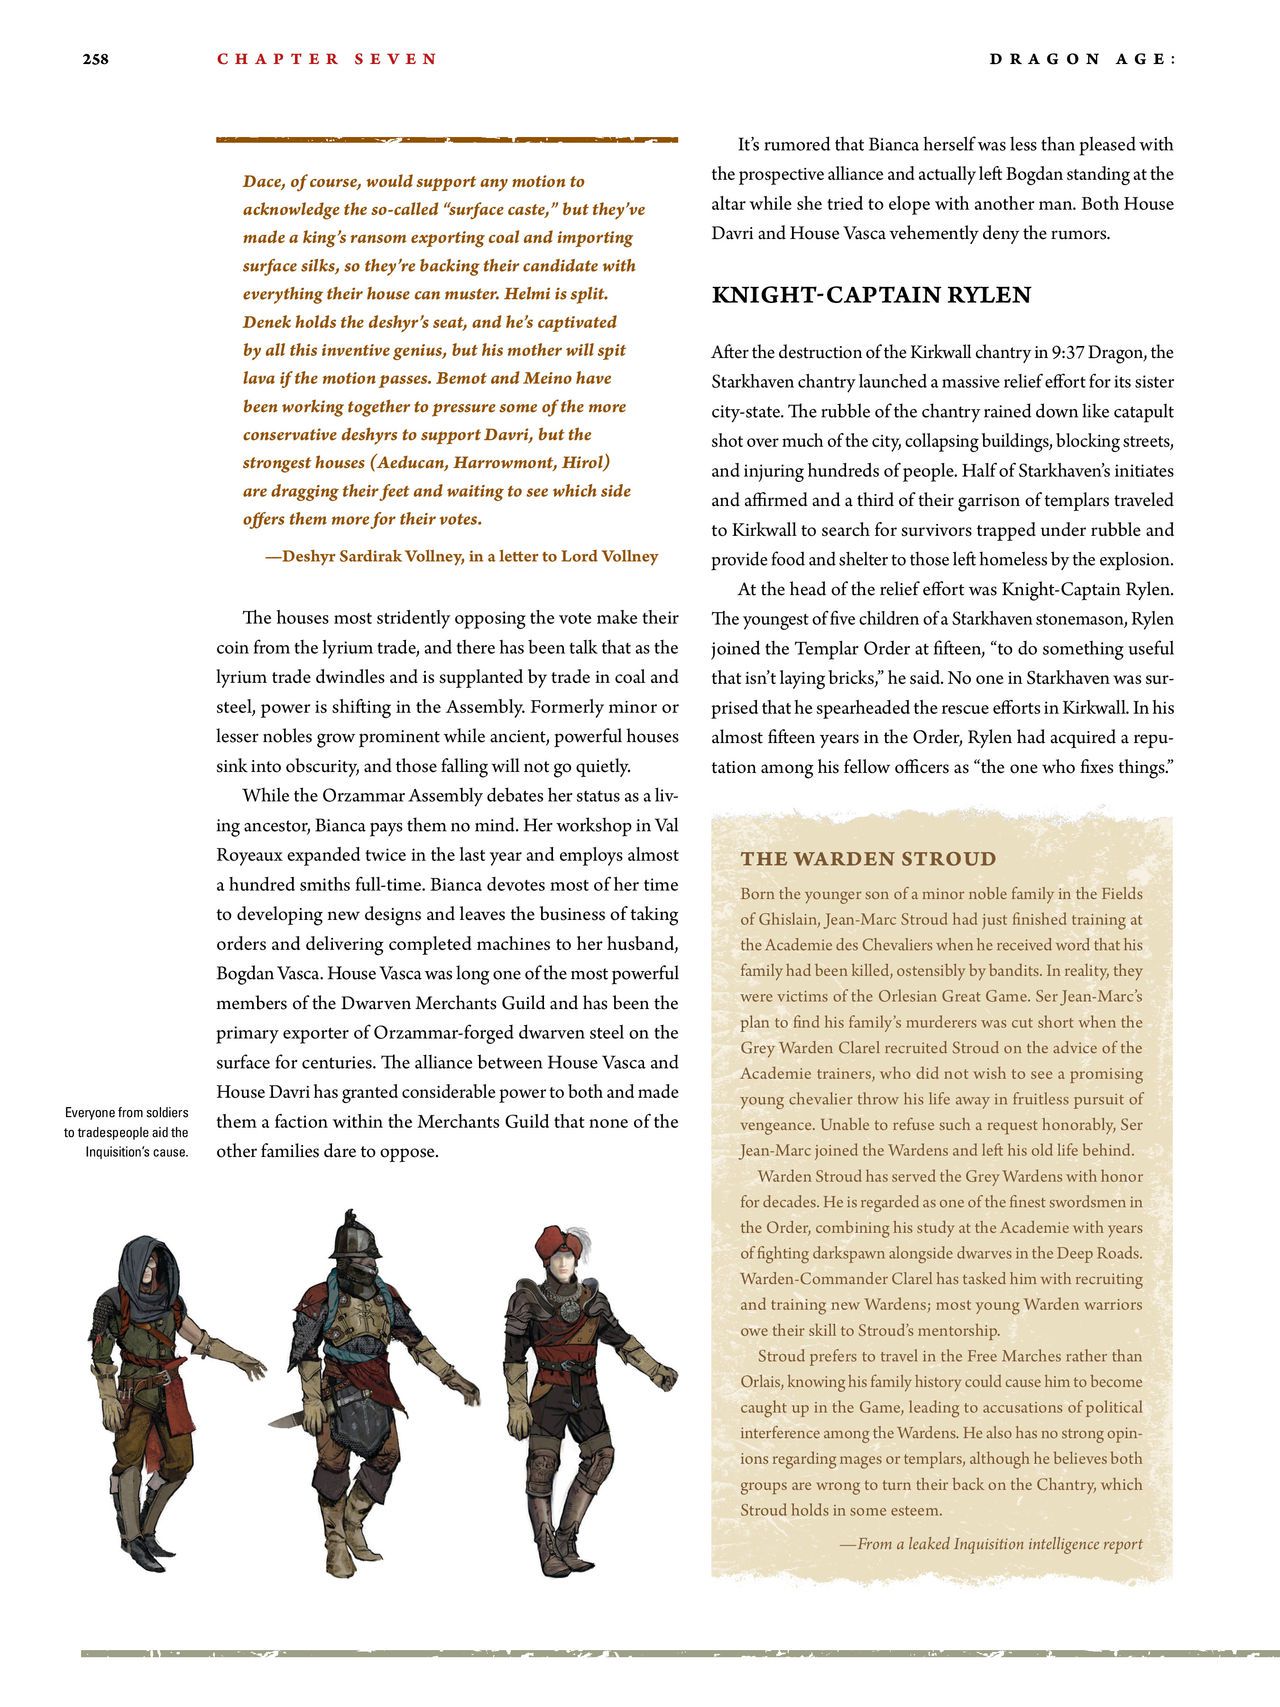 Dragon Age - The World of Thedas v02 251